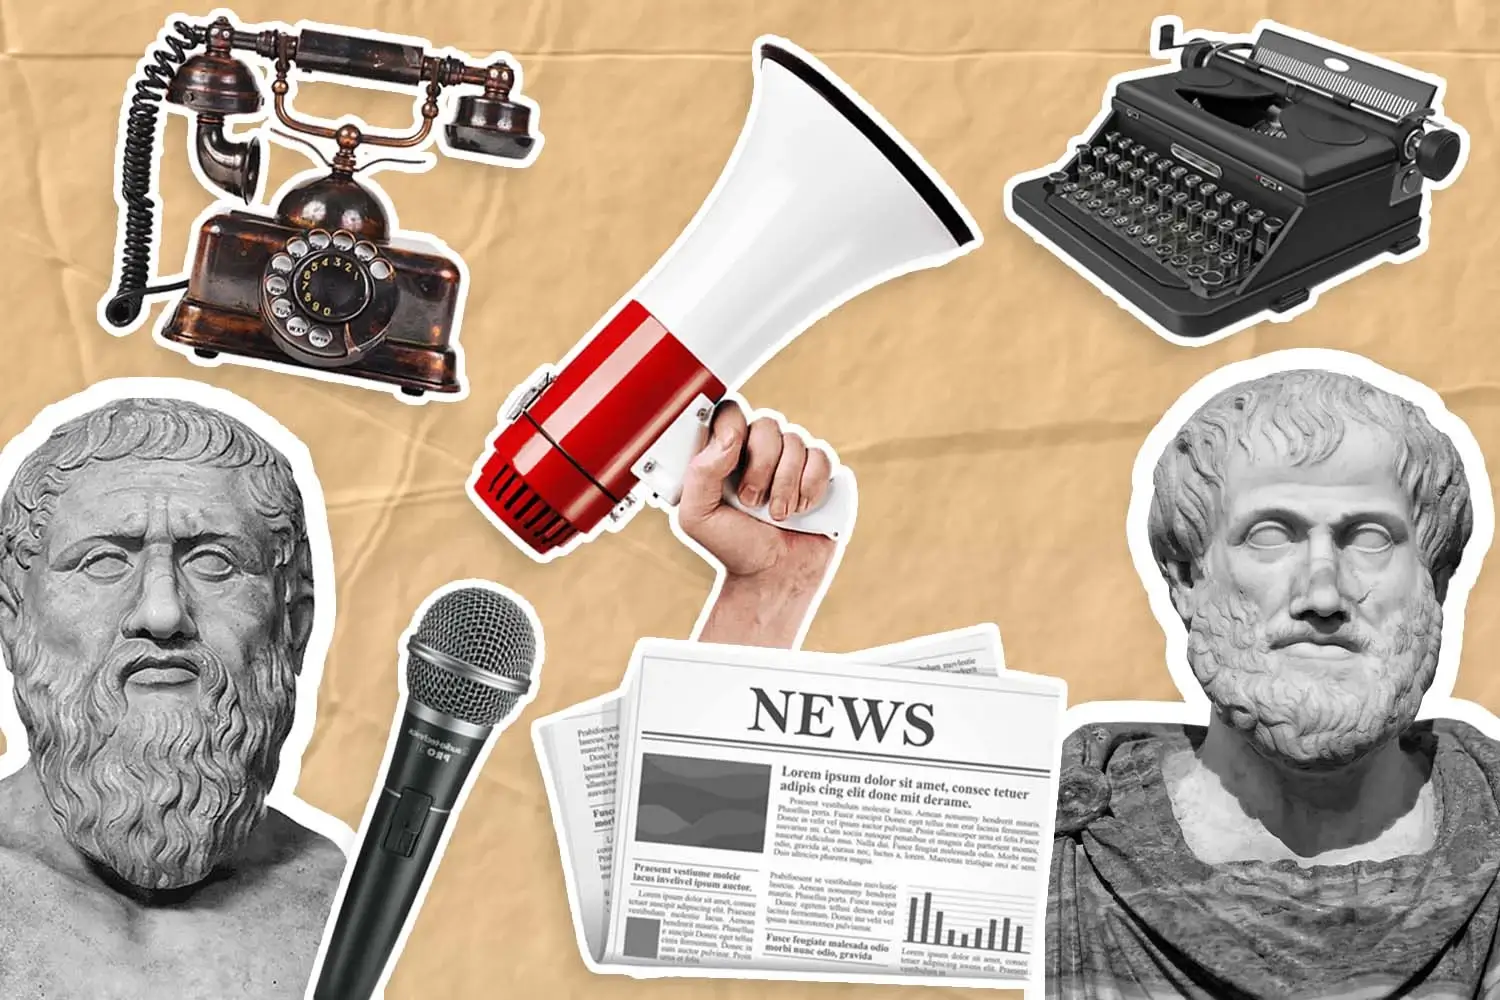 Images of Plato, Socrates, a newspaper, typewriter, megaphone and a microphone to show the evolution of public relations.